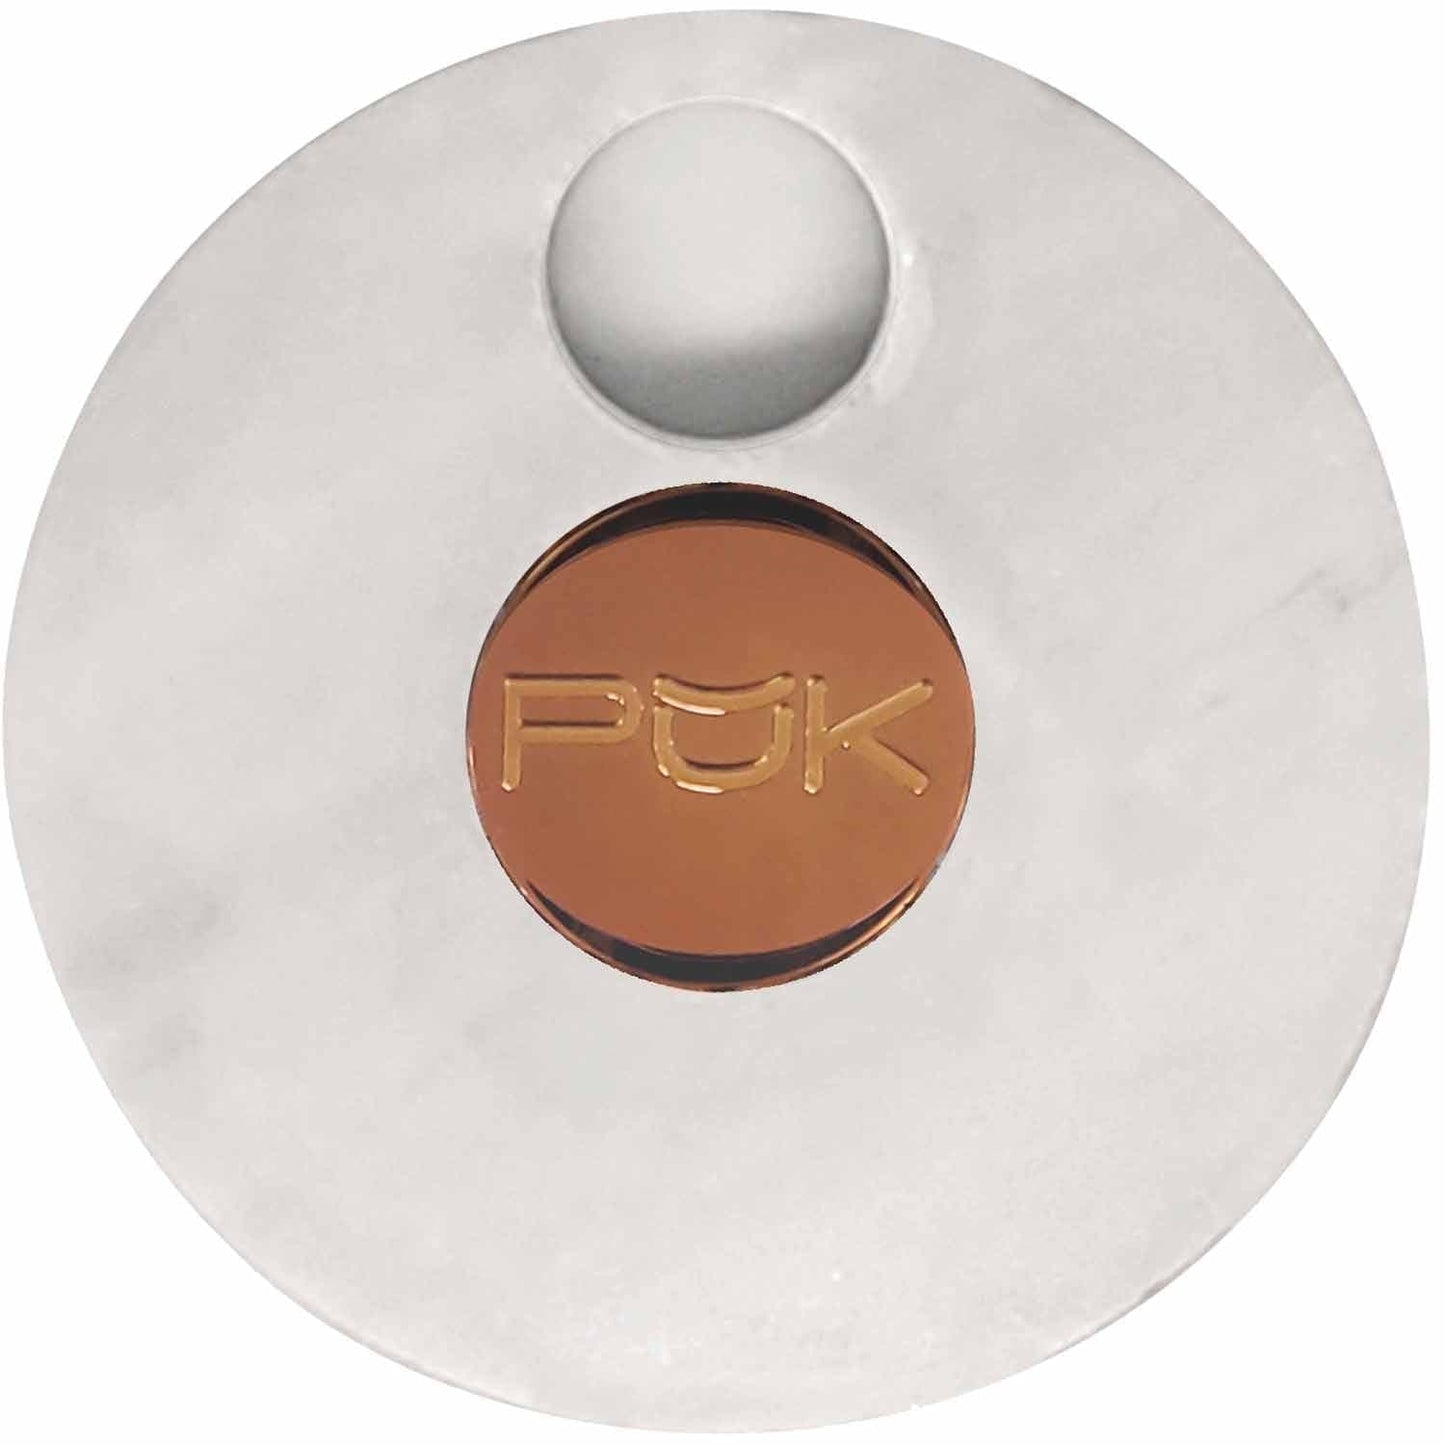 PUK ONLINE STORE White Stone PŬK with Rose Bronze Center Marble PŬK Cannabis Container and Smoking Device